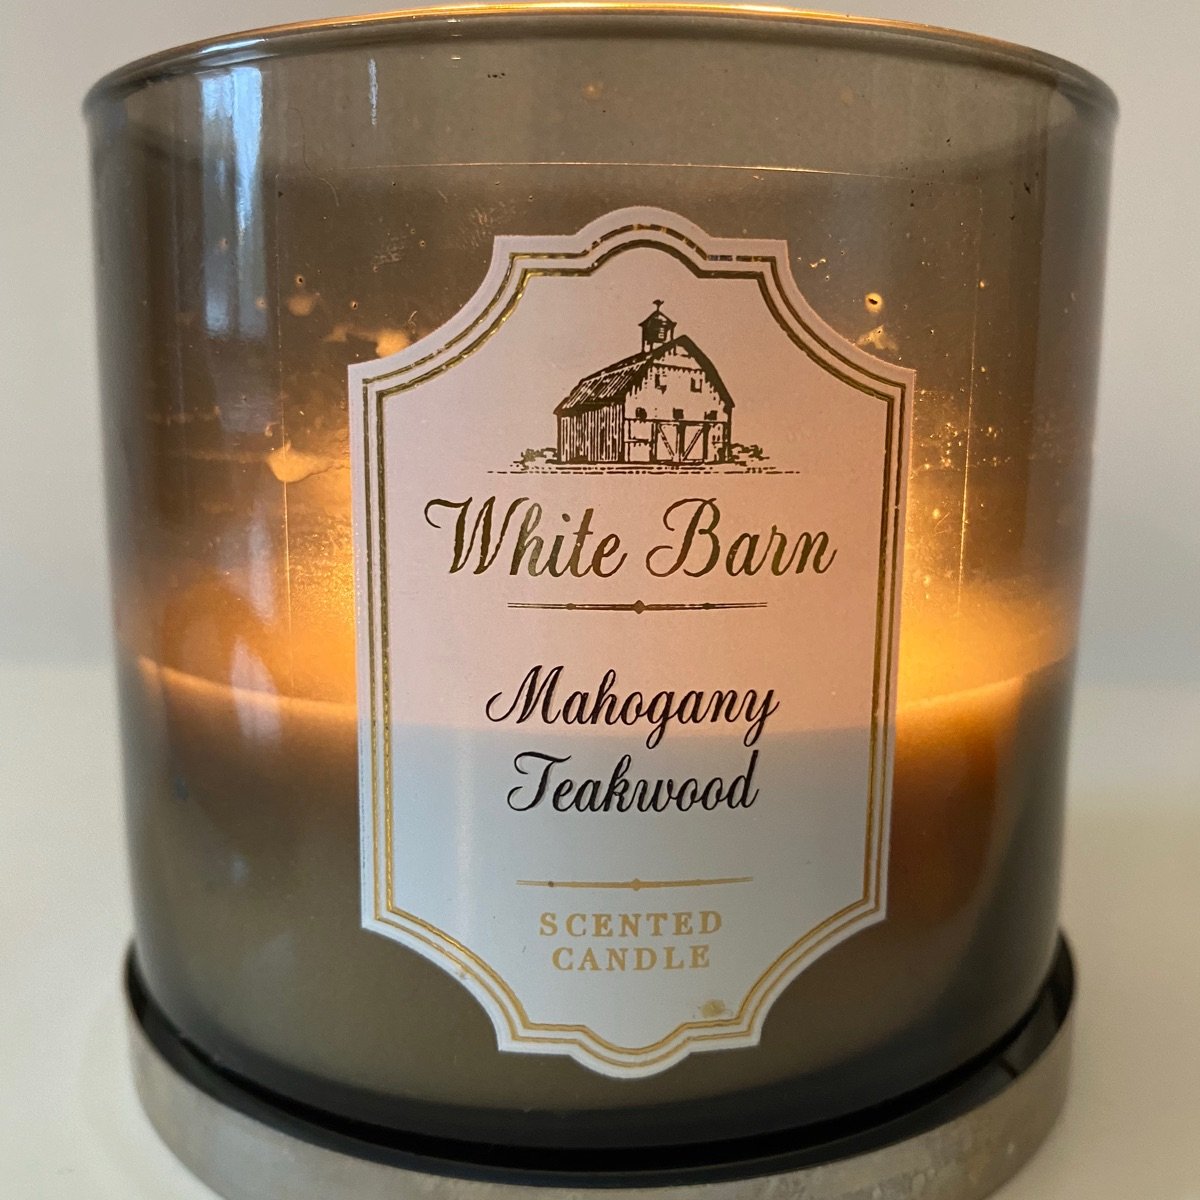 White Barn Mahogany Teakwood Scented Candle Review